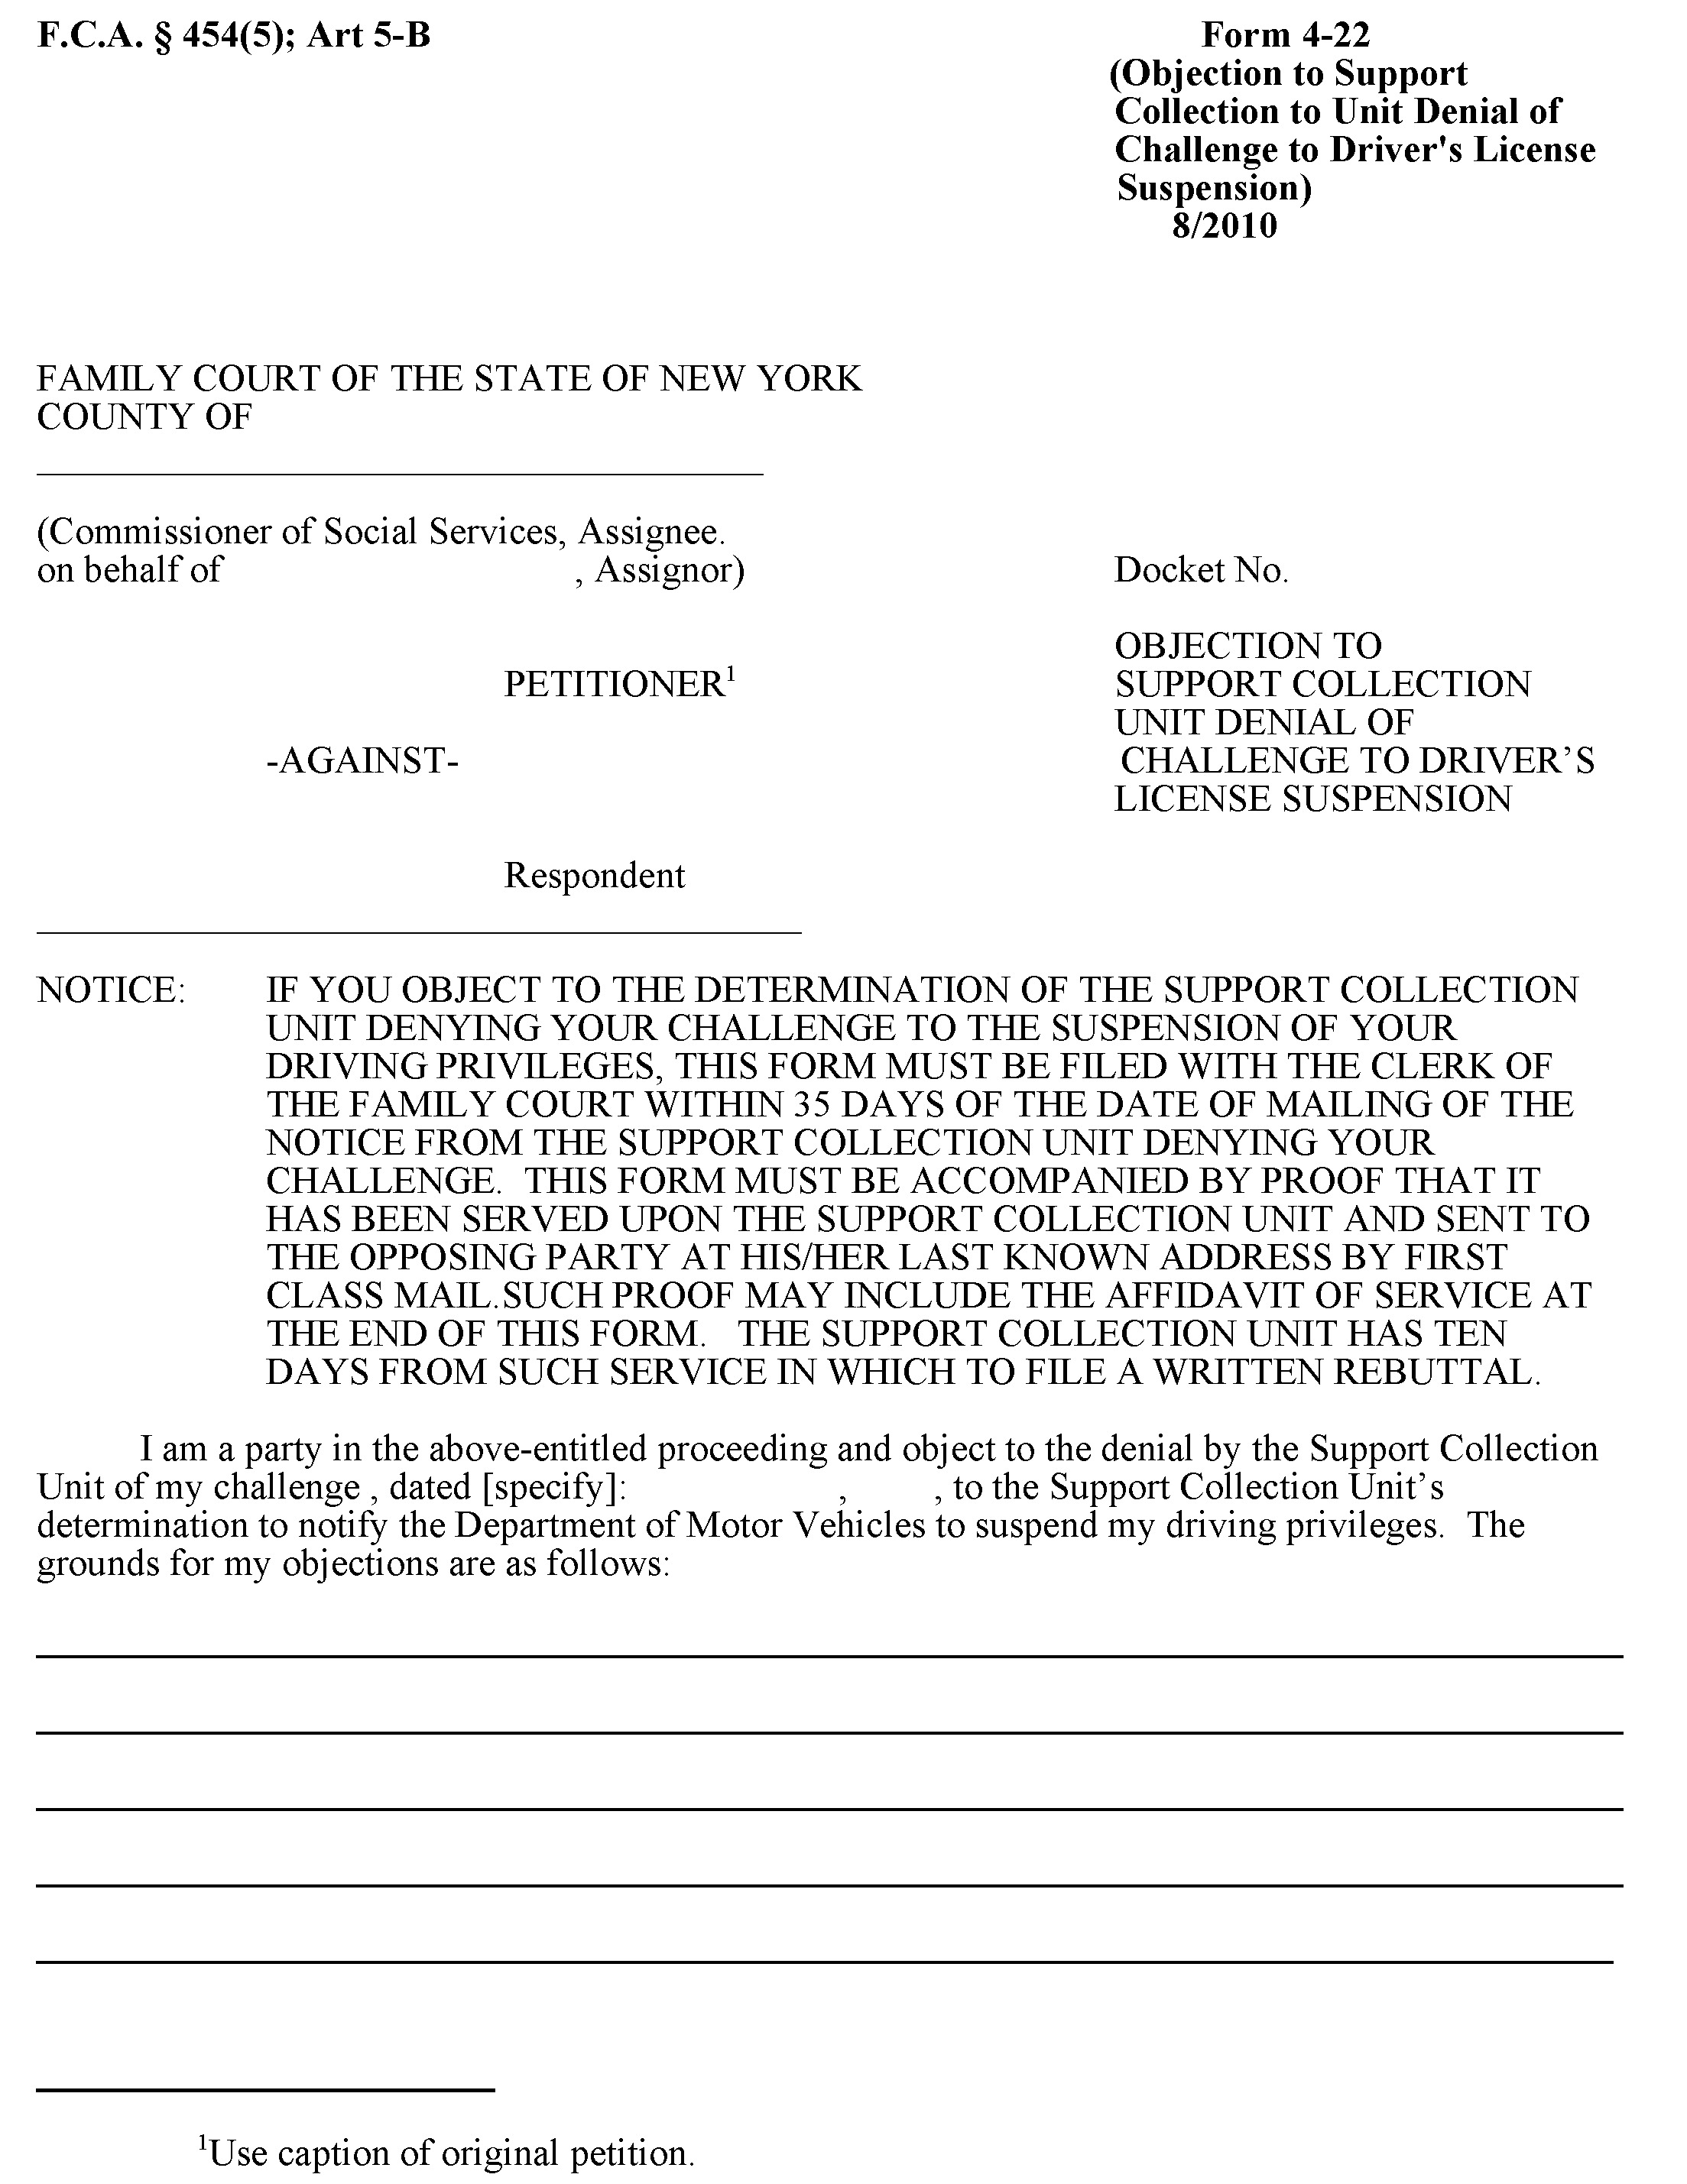 View Document - New York Codes, Rules and Regulations